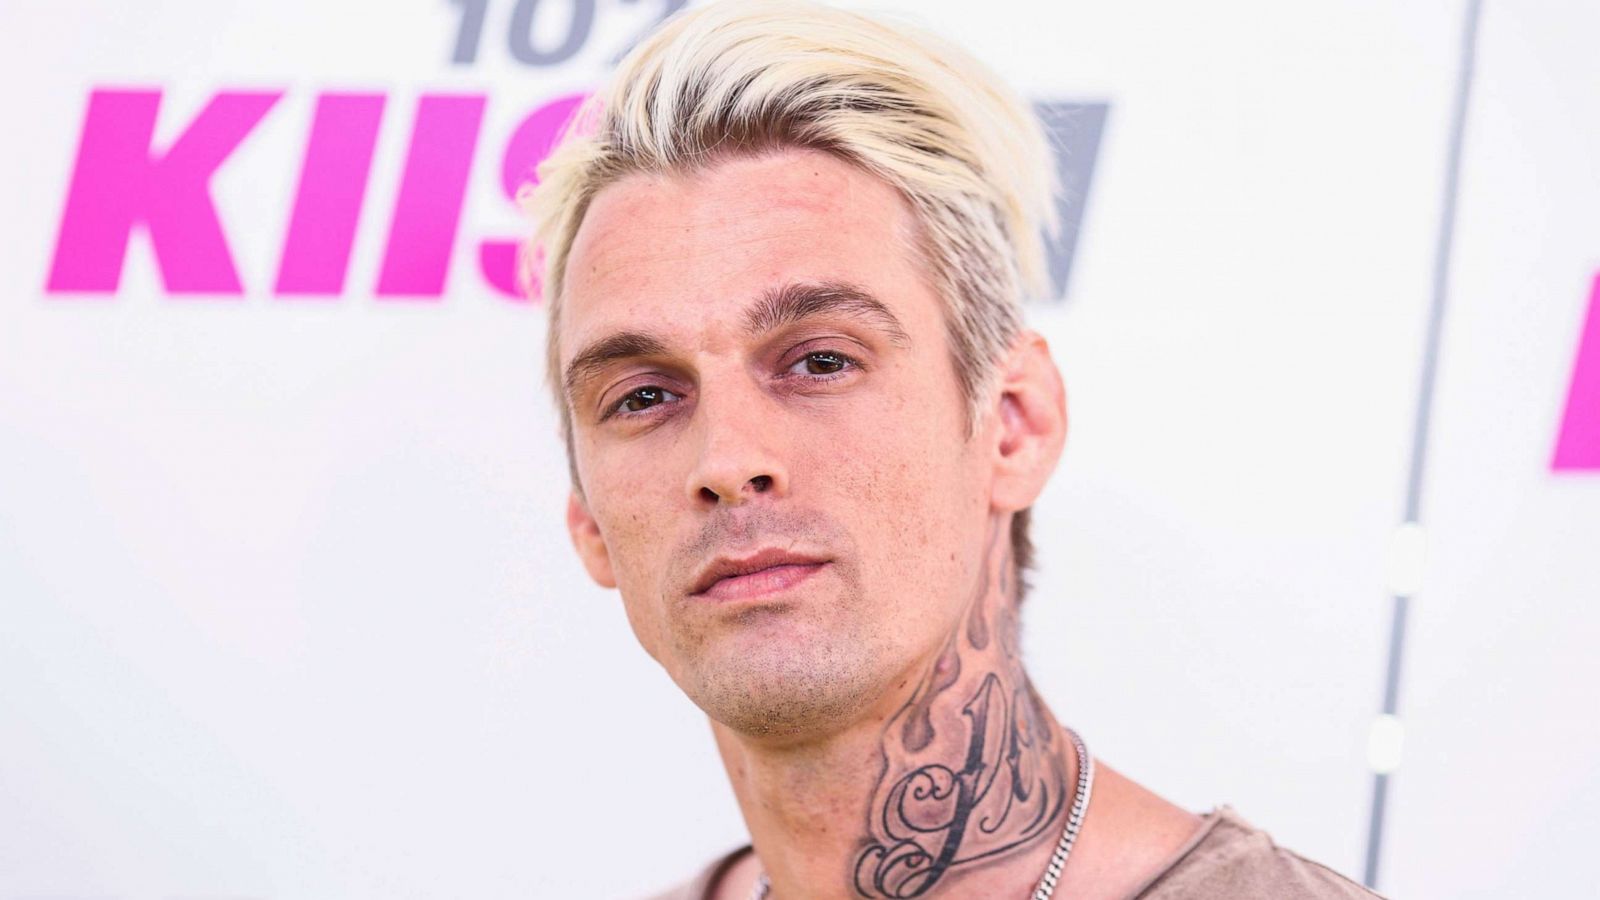 Tragic Death Of Aaron Carter: Son Princeton Files Wrongful Death Lawsuit Against Doctors And Pharmacies